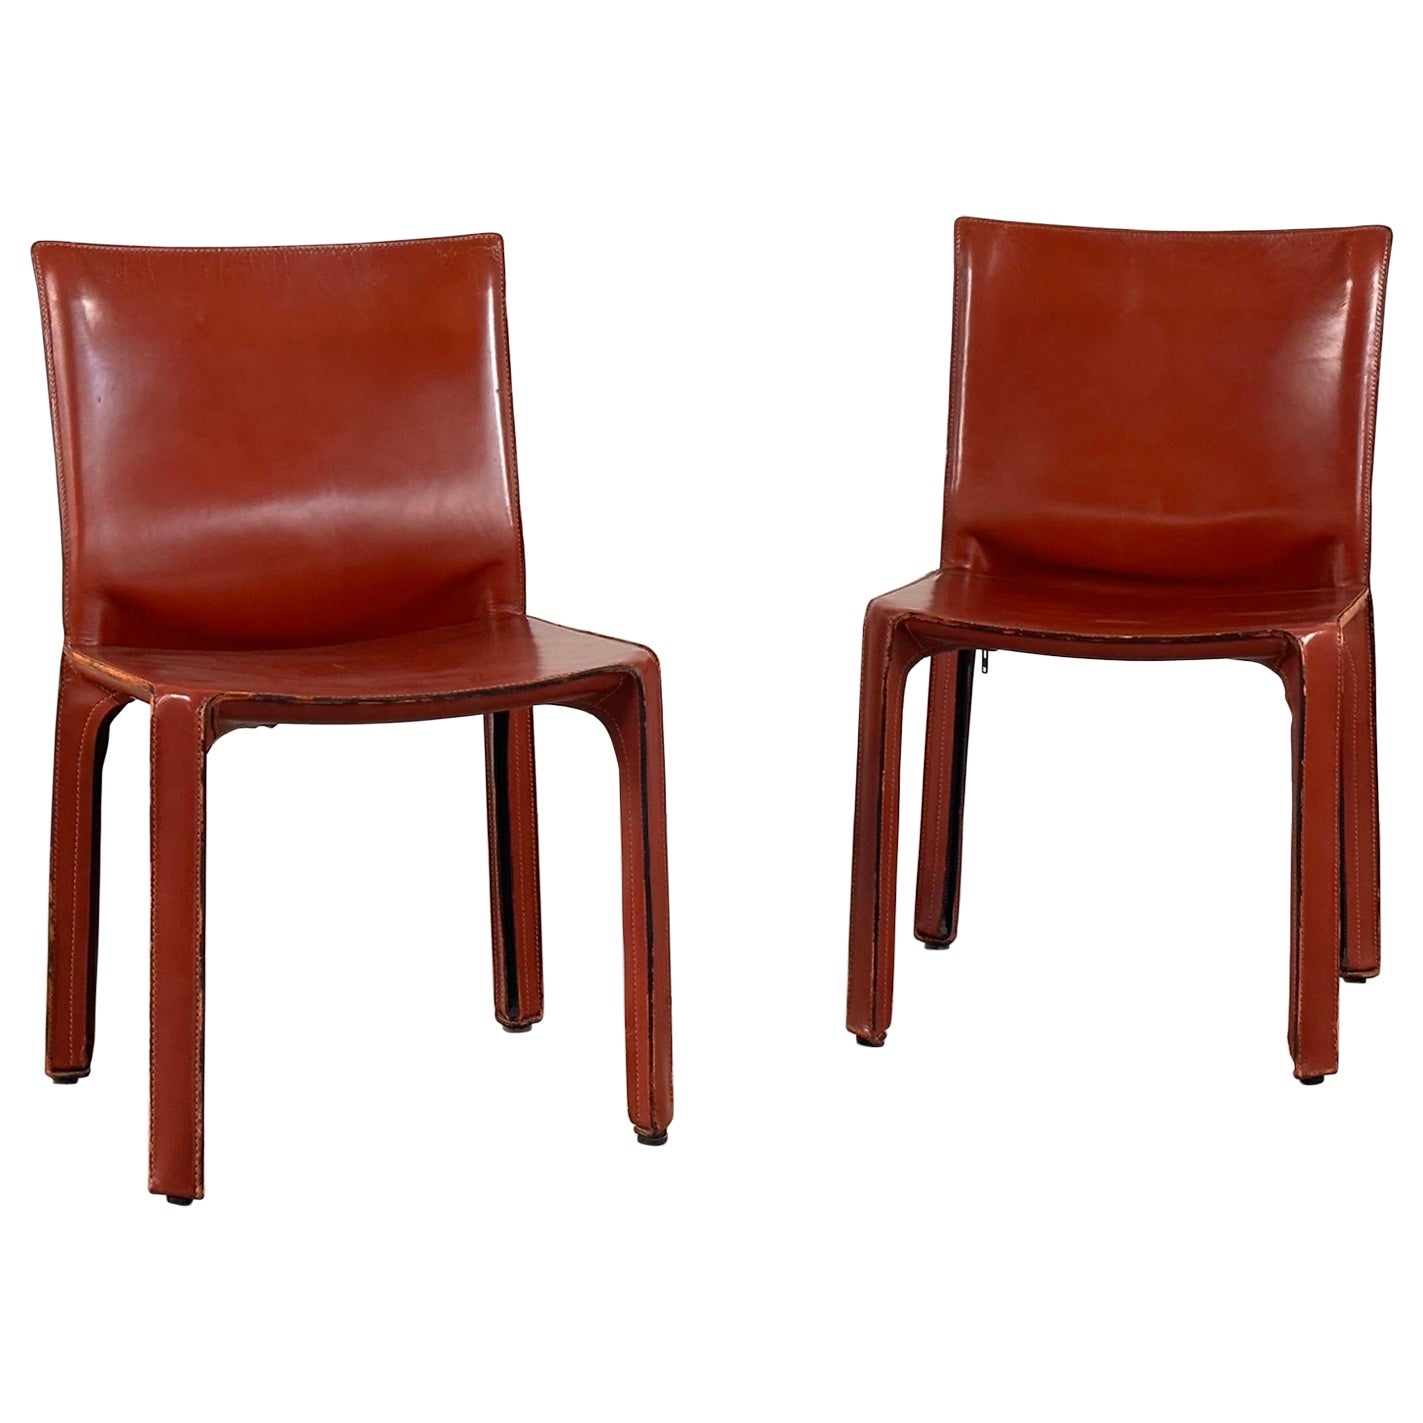 Pair CAB 412 Chairs by Mario Bellini for Cassina in Red Leather, 1970s For Sale